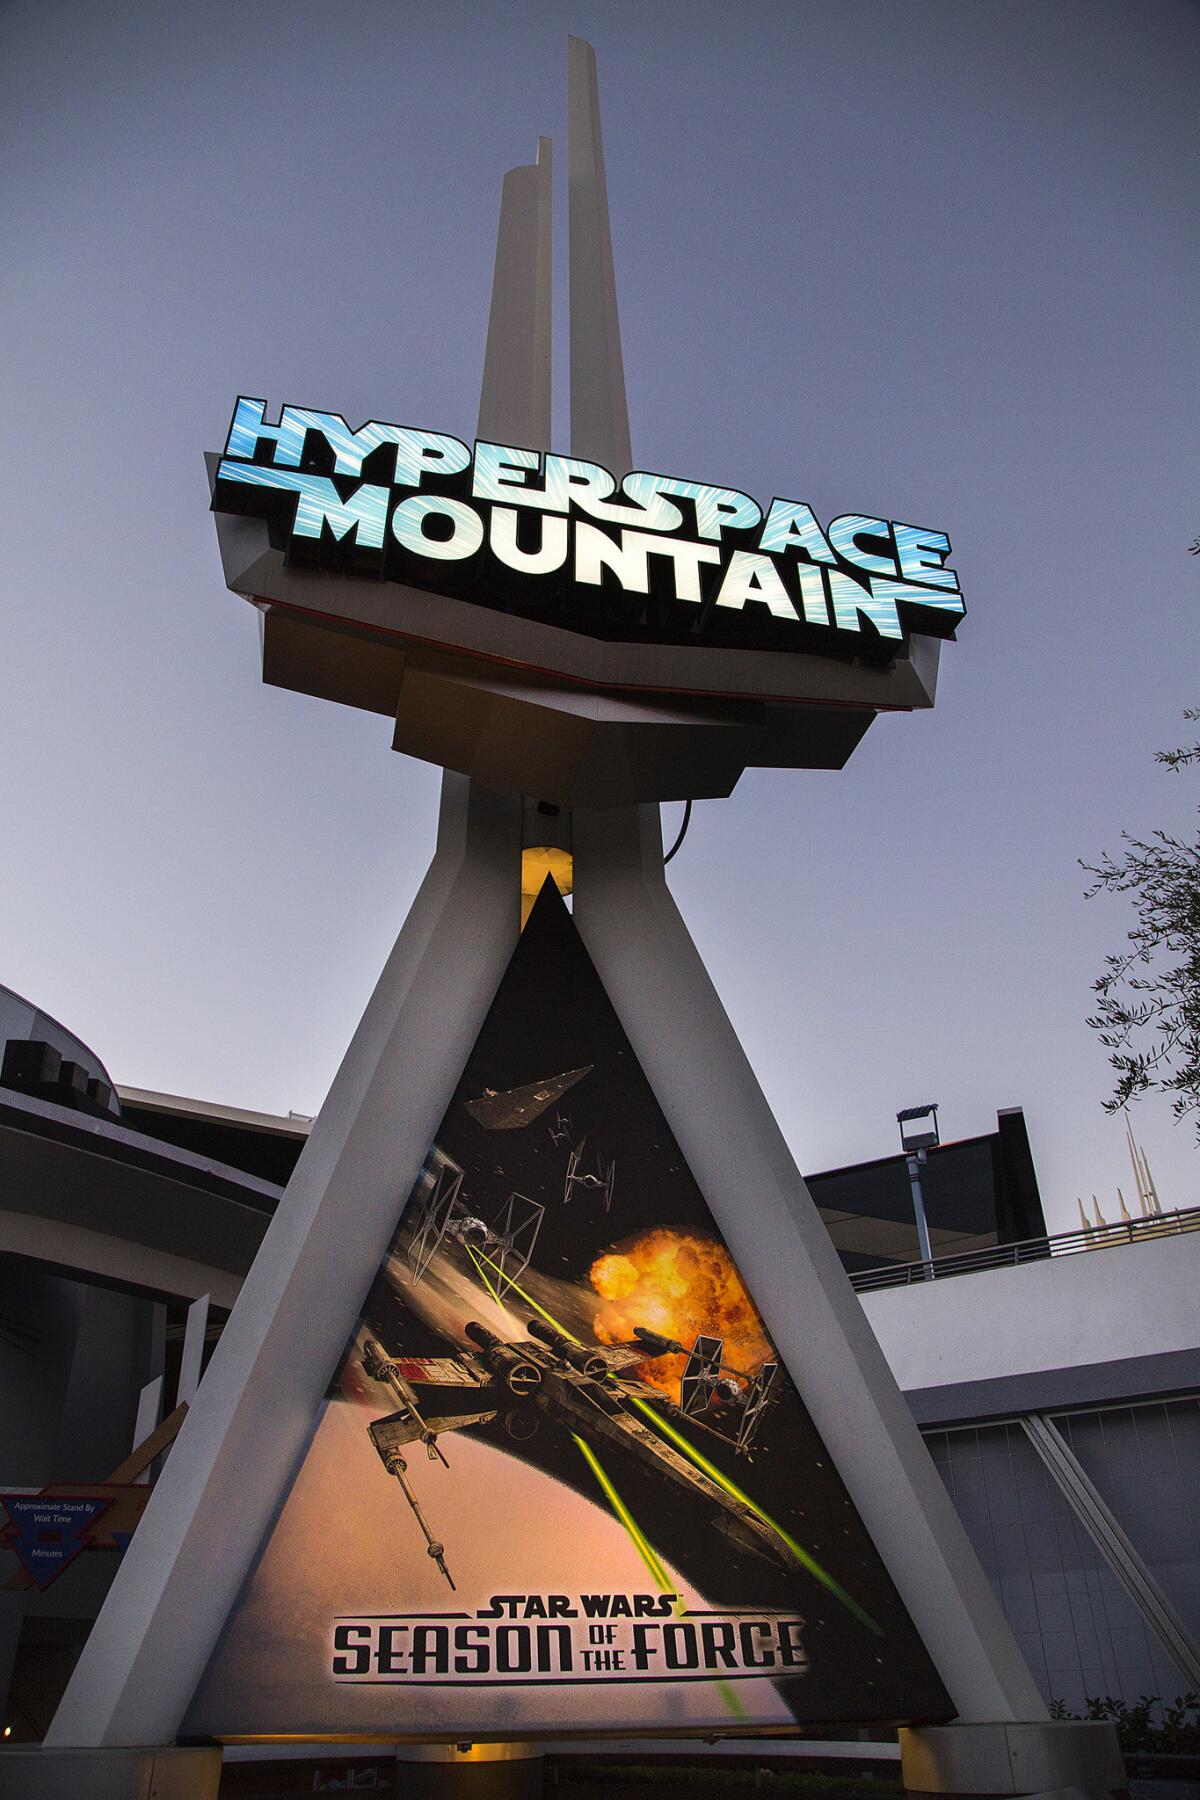 During Season of the Force, the classic Space Mountain attraction is reimagined as Hyperspace Mountain.